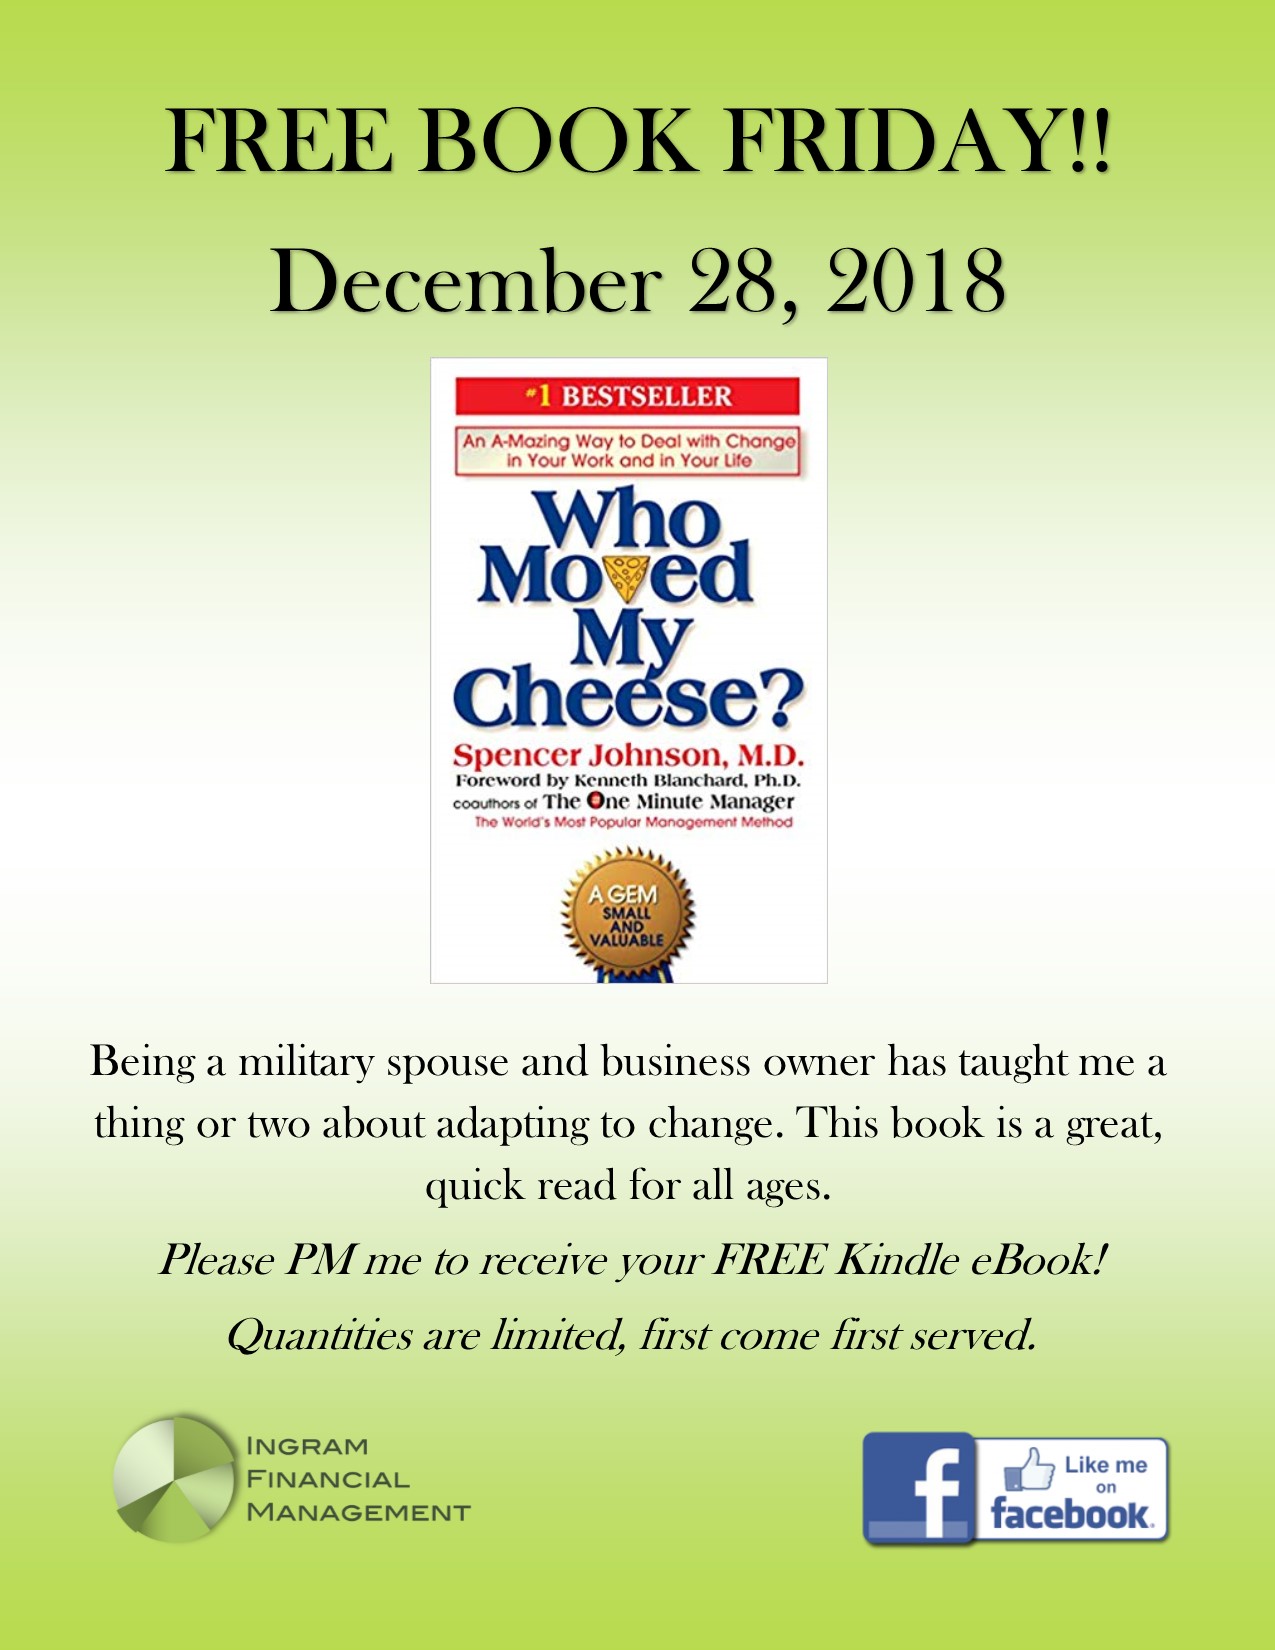 Final Free Book Friday for 2018!